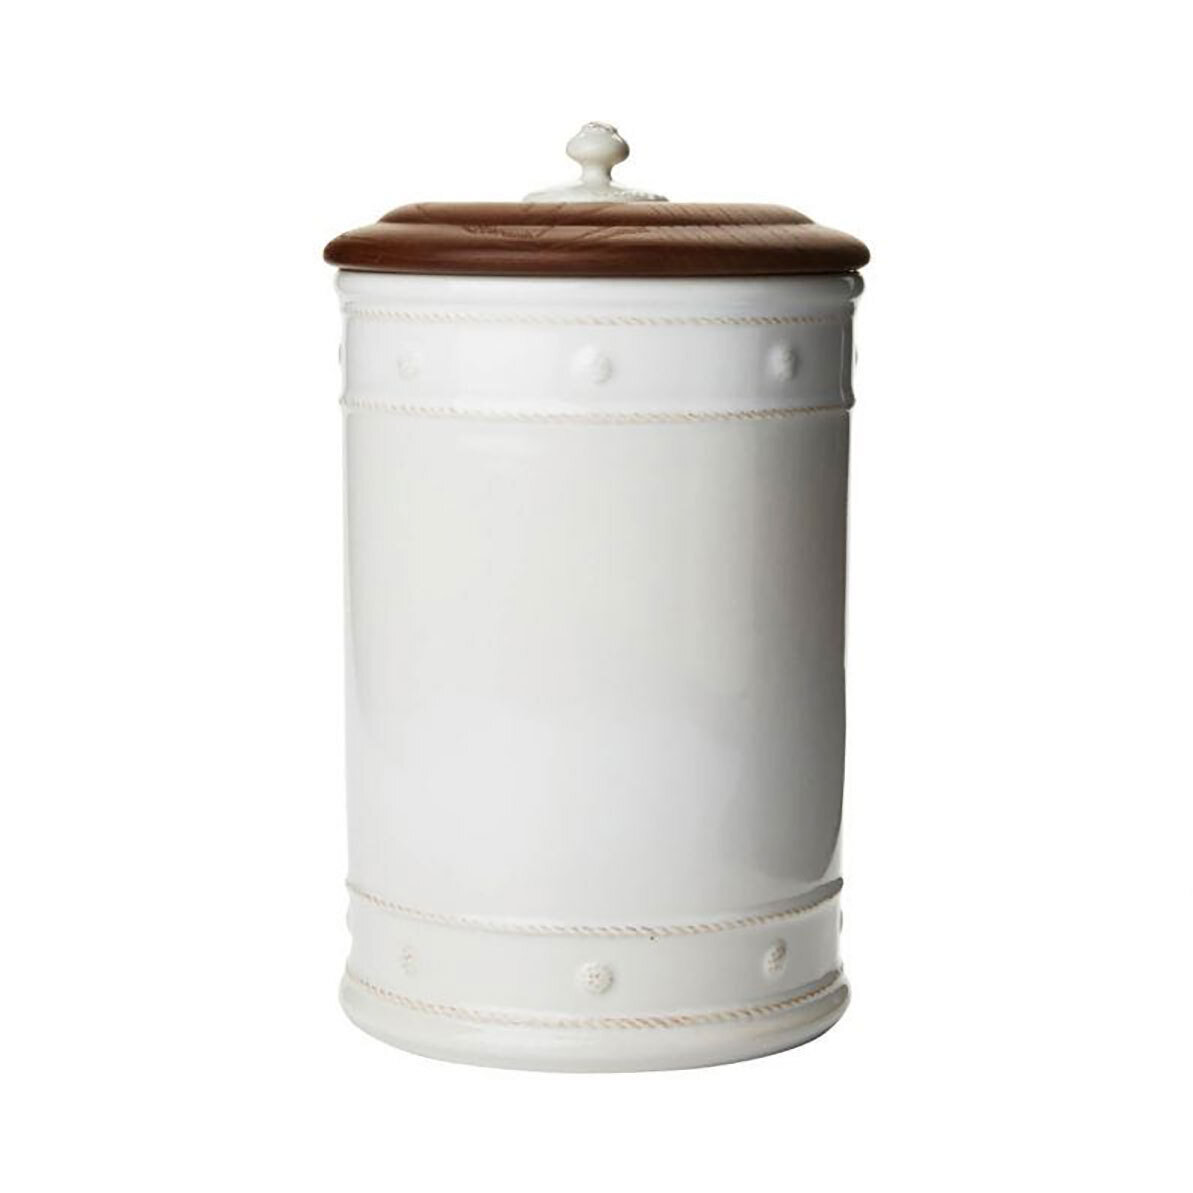 Juliska Berry & Thread Whitewash 13 Inch Canister with Wooden Lid JA110/W